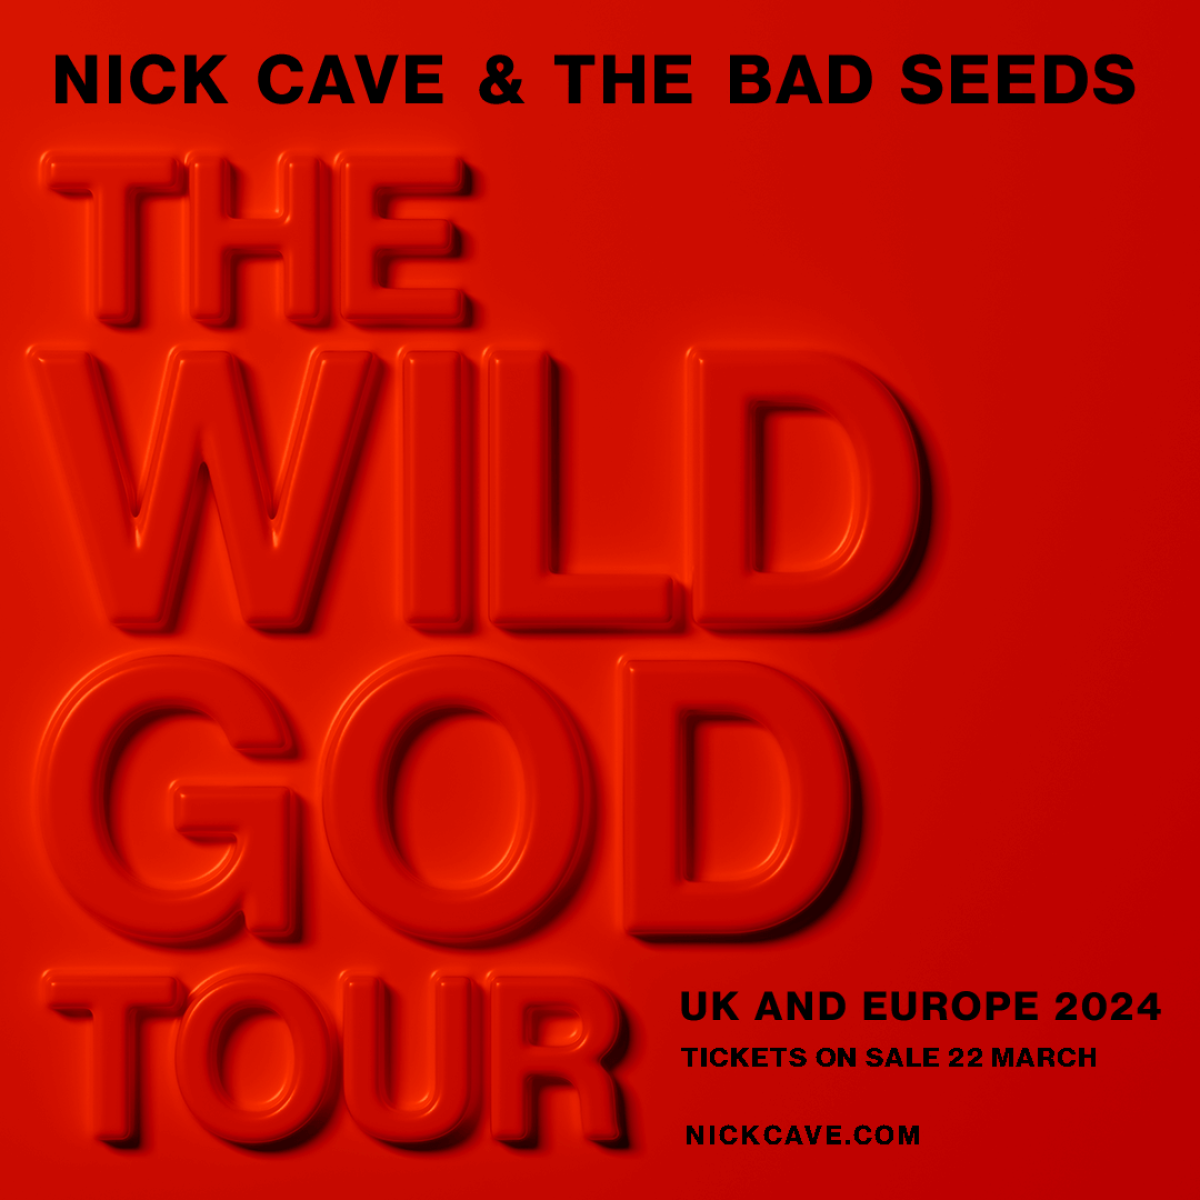 Nick Cave and the Bad Seeds - The Wild God Tour at Uber Arena Tickets